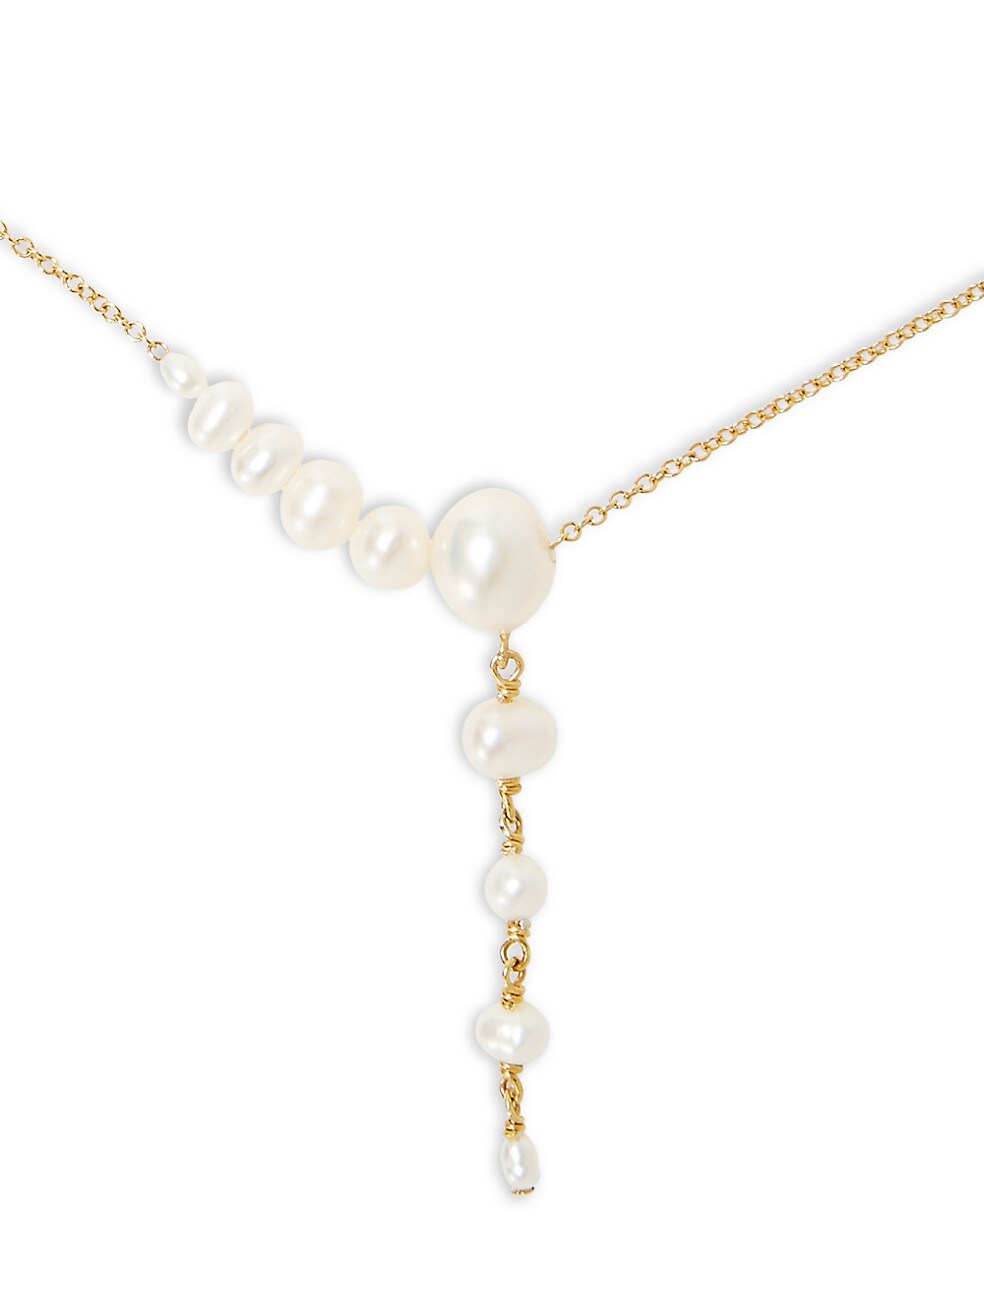 Graduated White Pearl Gold Lariat Necklace